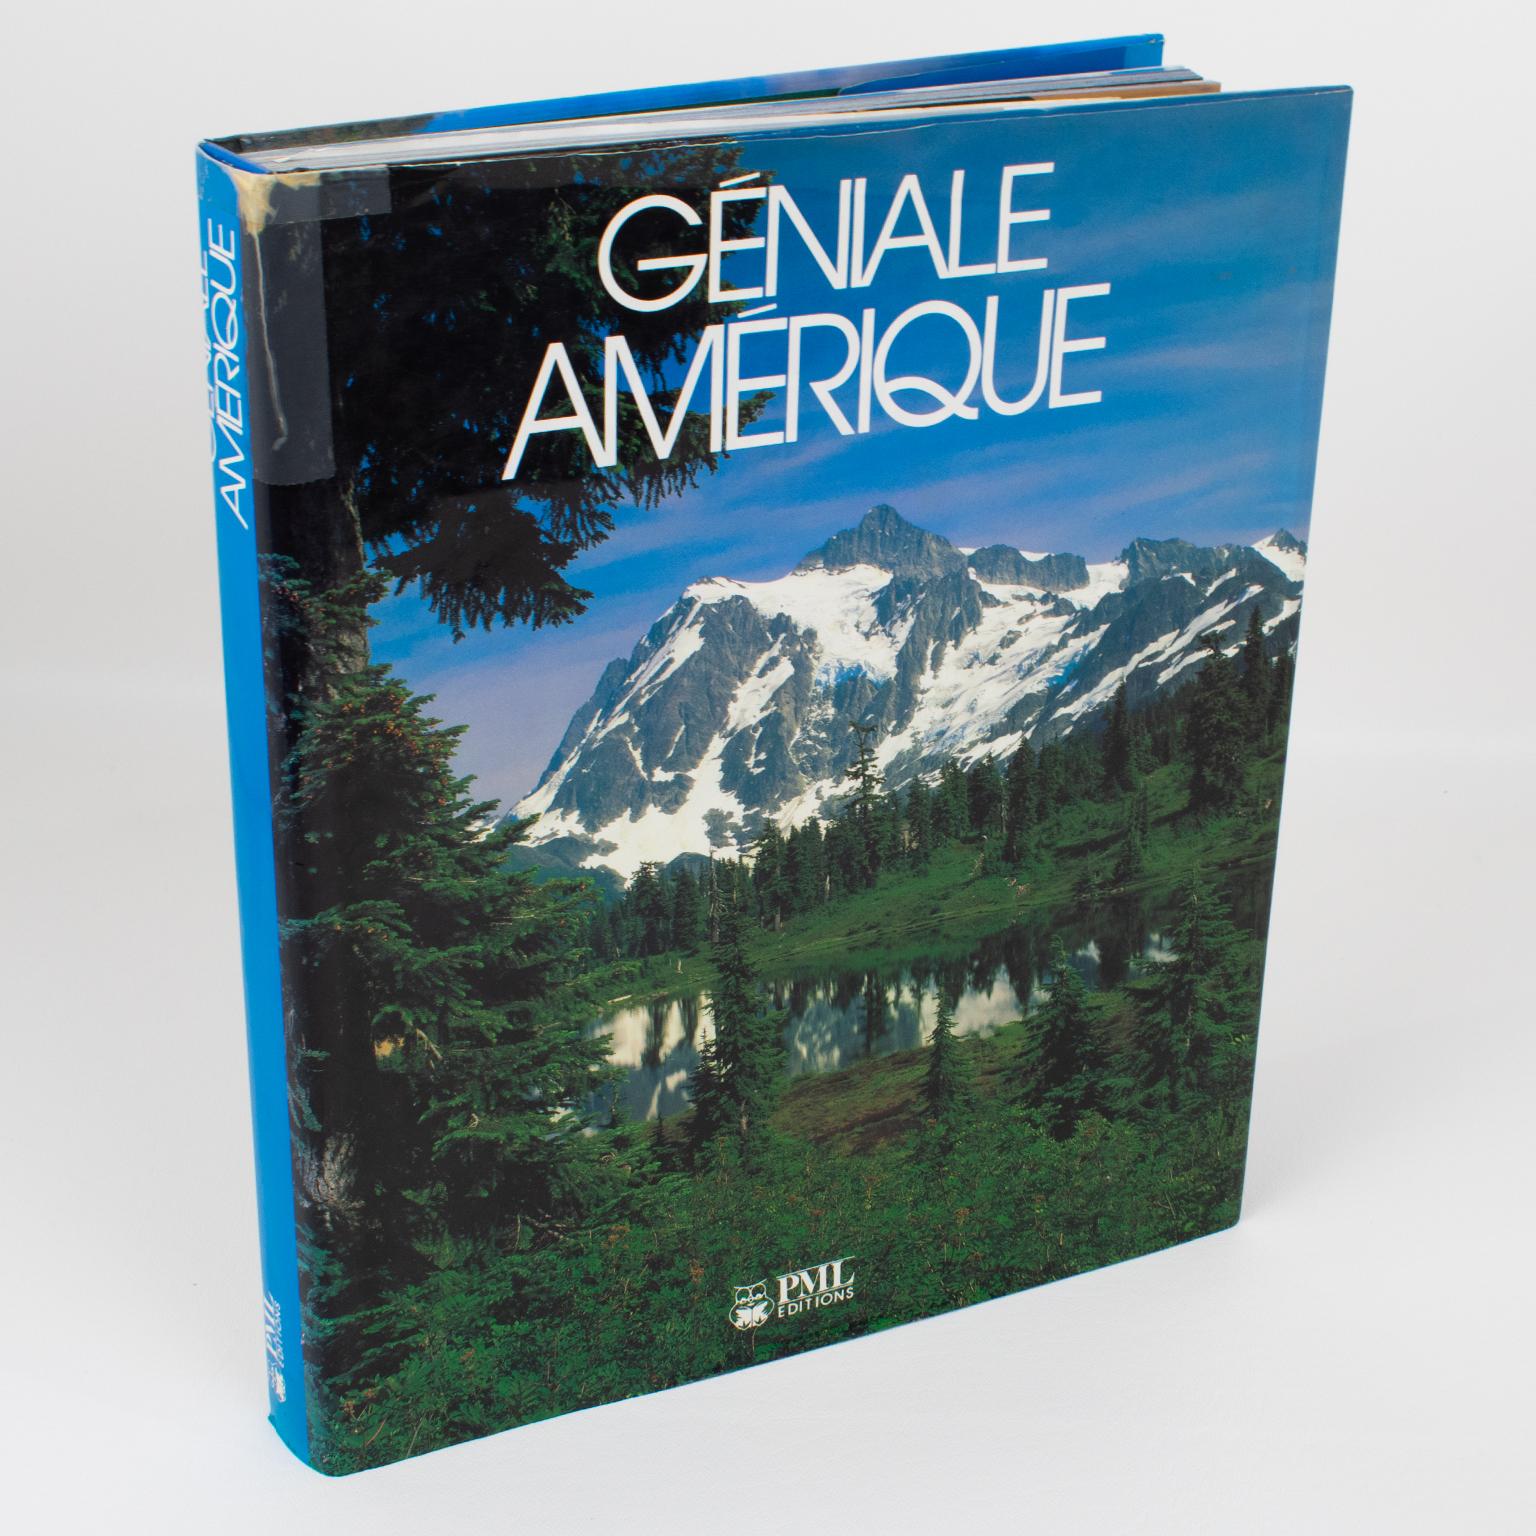 Geniale Amerique (Great America), French book by Editions PML, 1988.
America is a rich and immense land of incredible beauty, sometimes still primitive; a complex continent in complete evolution, but whose soul remains essentially American.
Only an